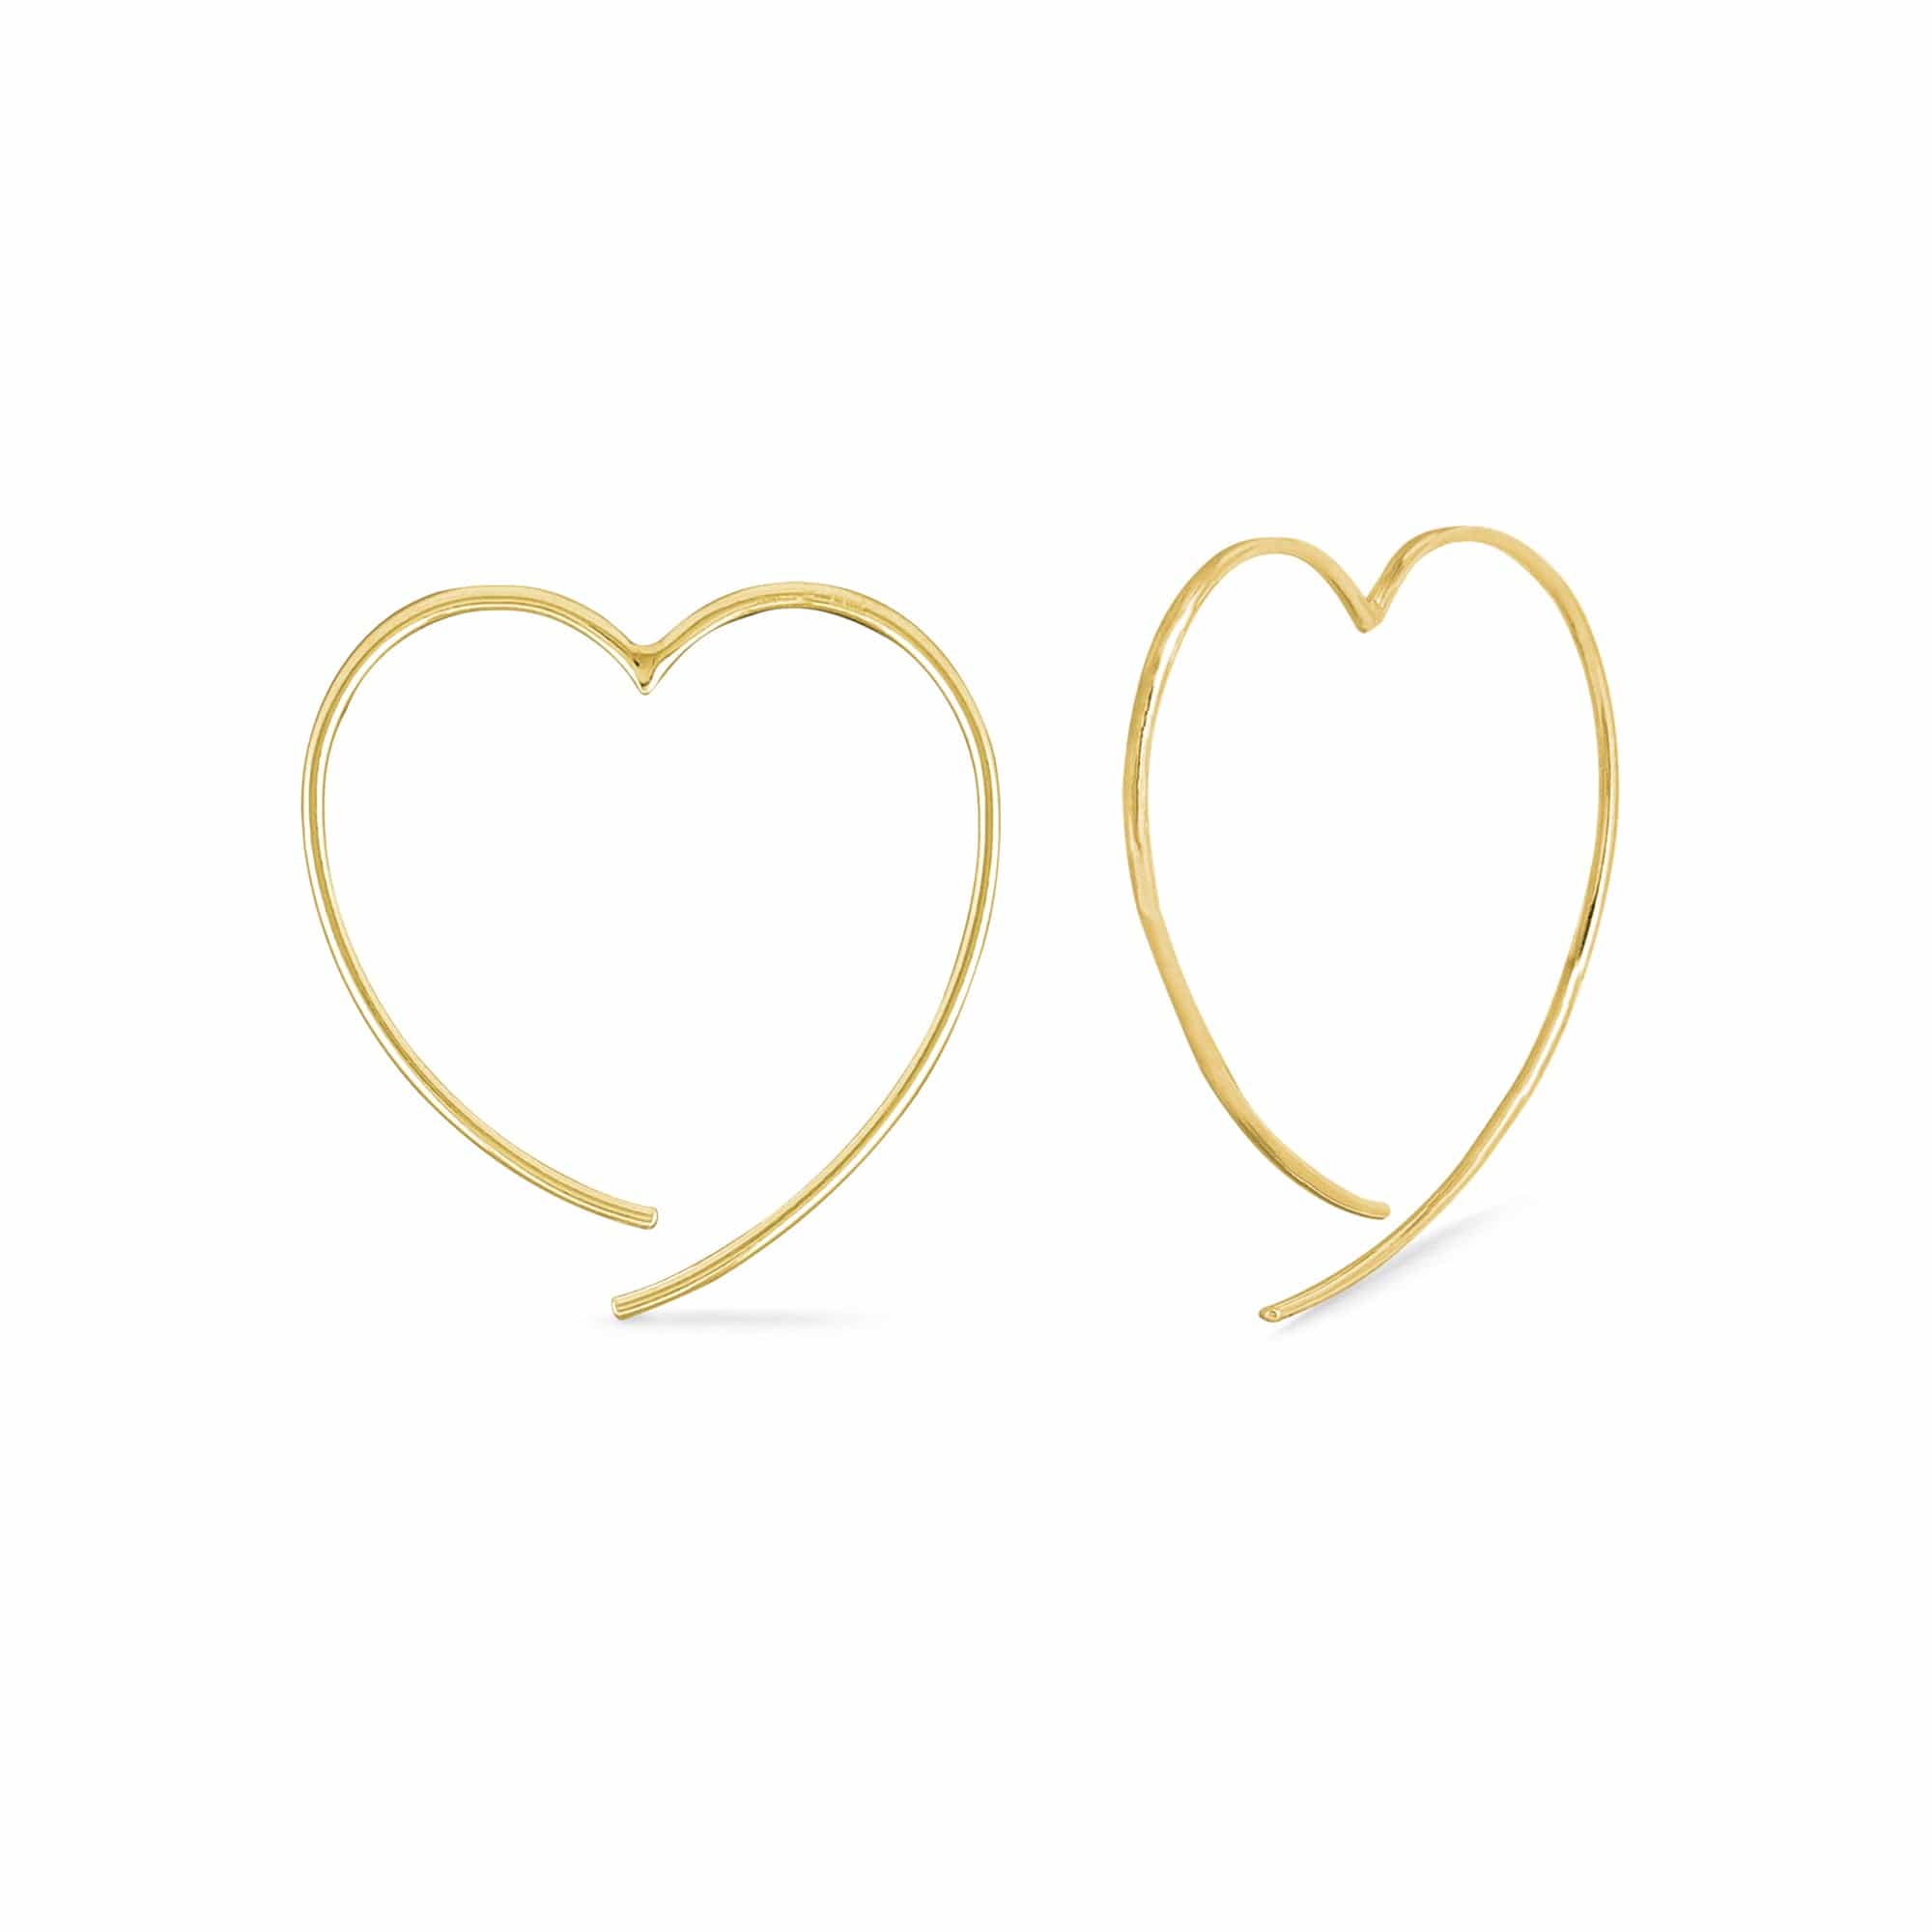 Boma Jewelry Earrings 14K Gold Plated / 1.5" Heart Pull Through Hoops